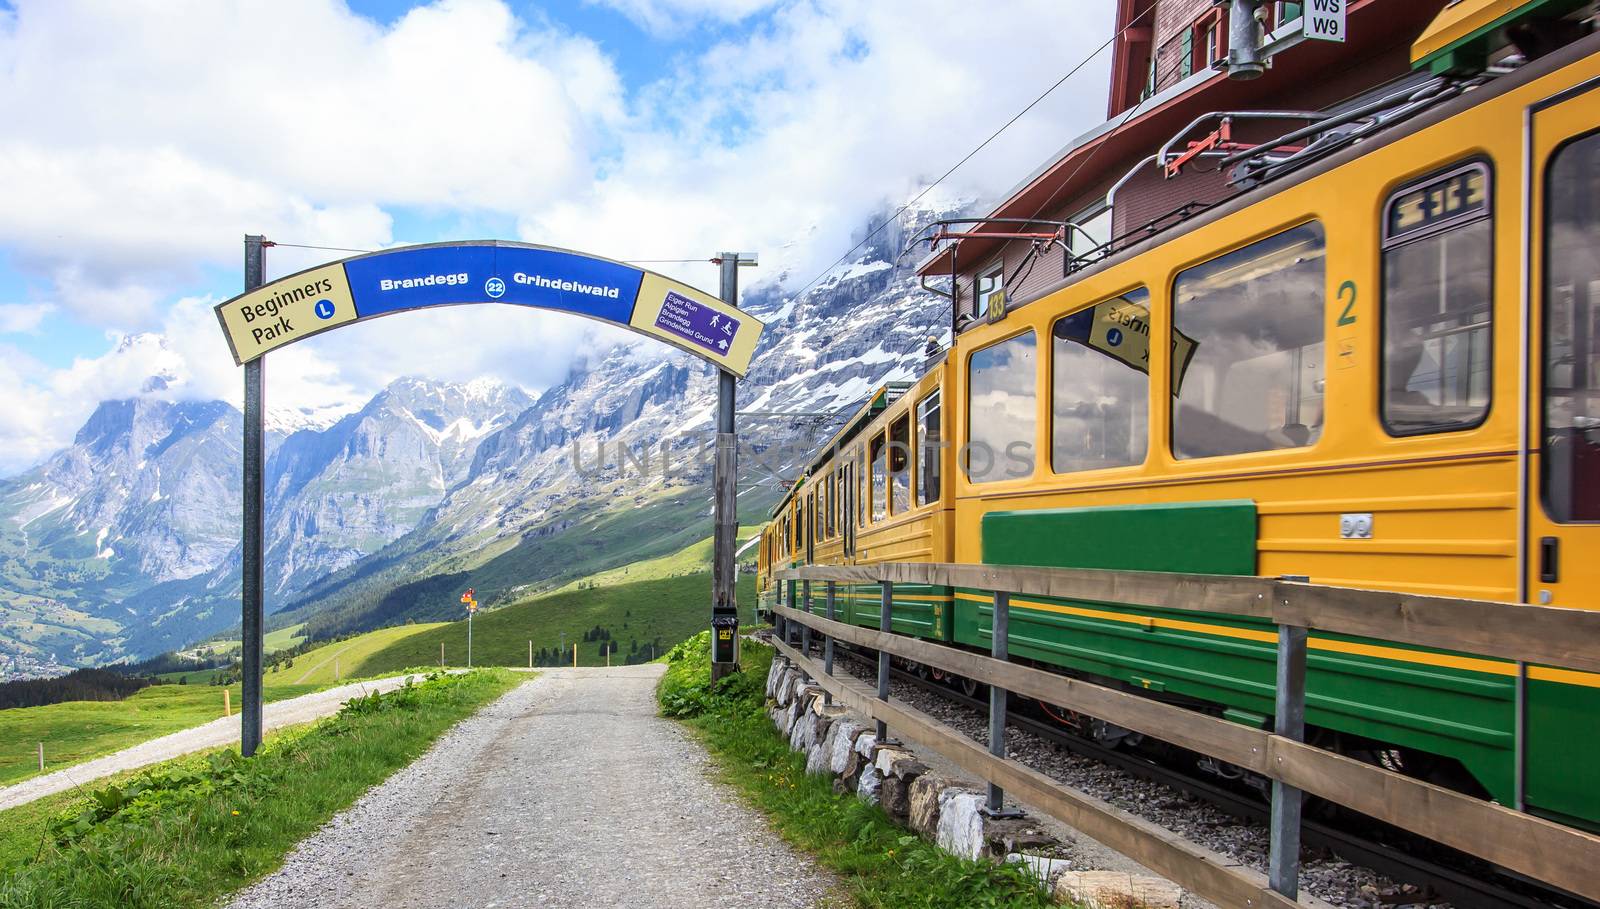 Sign of Starting point to begin walking trail with view of Swiss wengernalpbahn railways train departing Kleine Scheidegg station to Grindelwald, Switzerland. Walking trail along green fresh meadow with snow capped mountains as a background